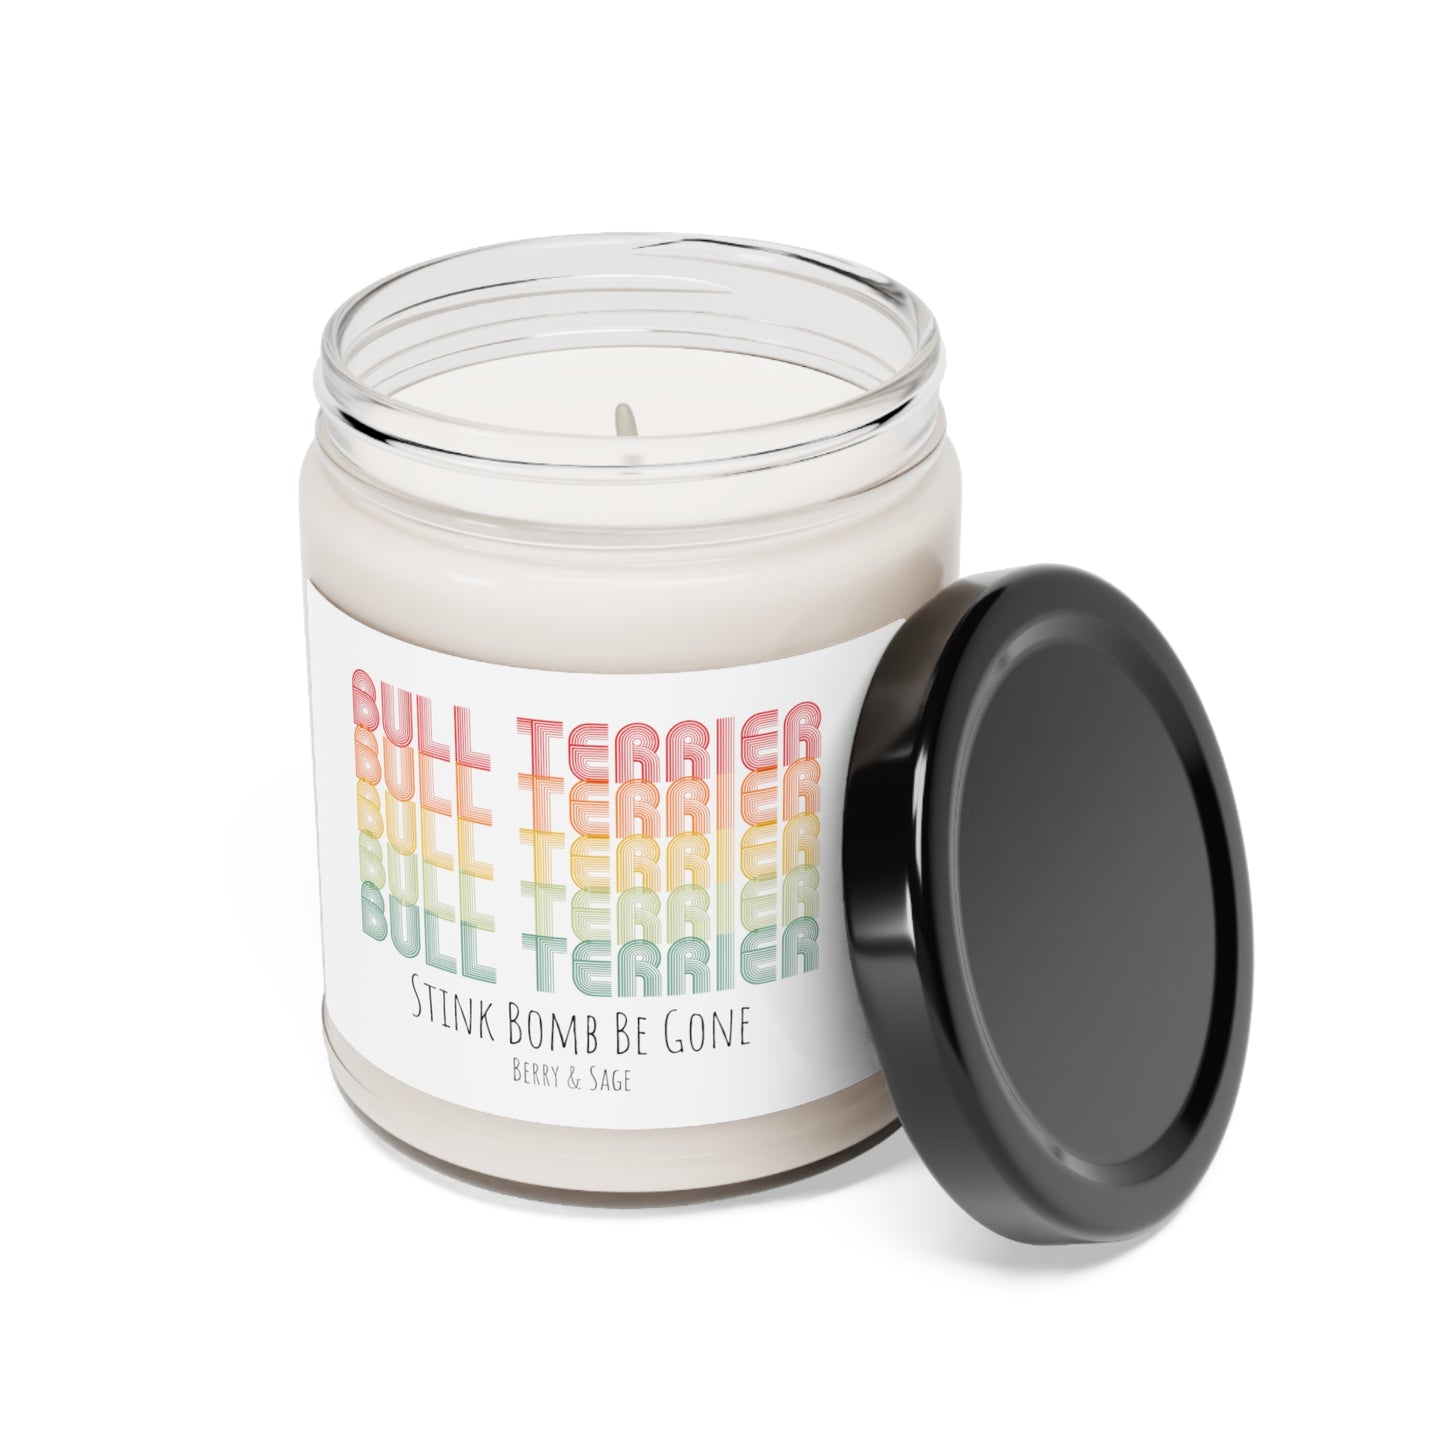 Bull Terrier Scented Soy Candle, 9oz